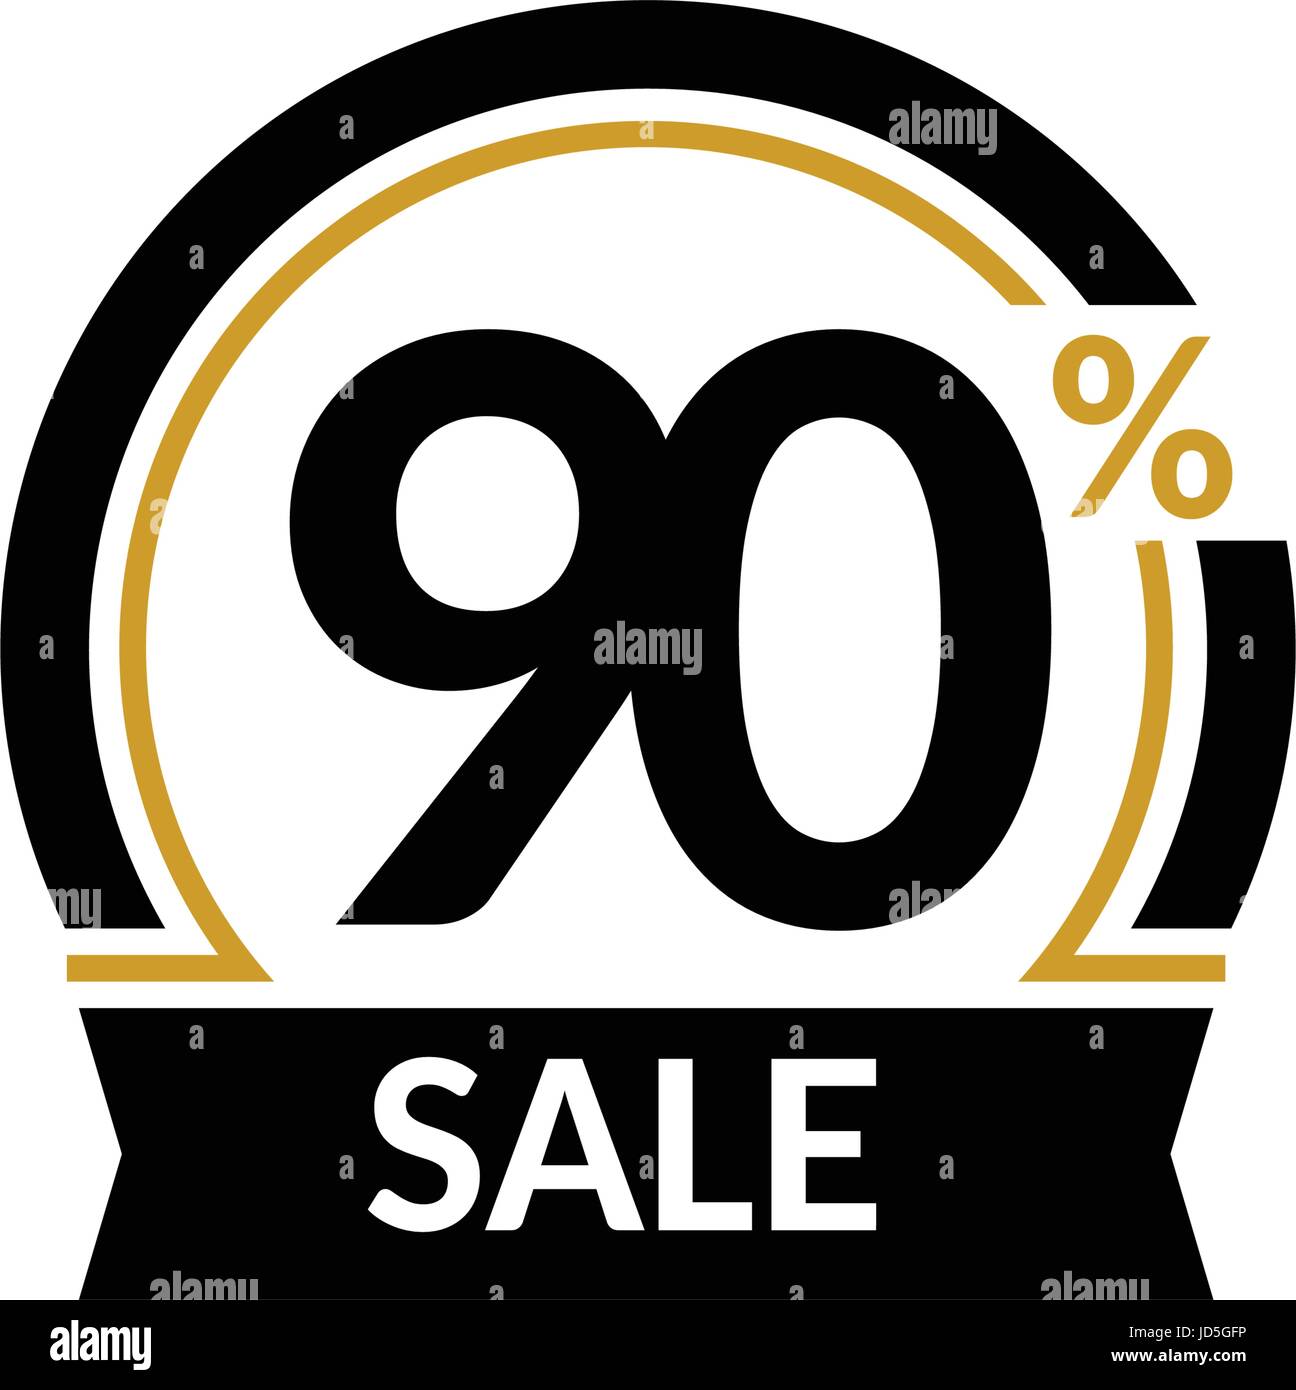 Discount card with 90 percent sale. Advertising Sale vector isolated sign. Promotion Stylish logo design under the black and gold arch Stock Vector